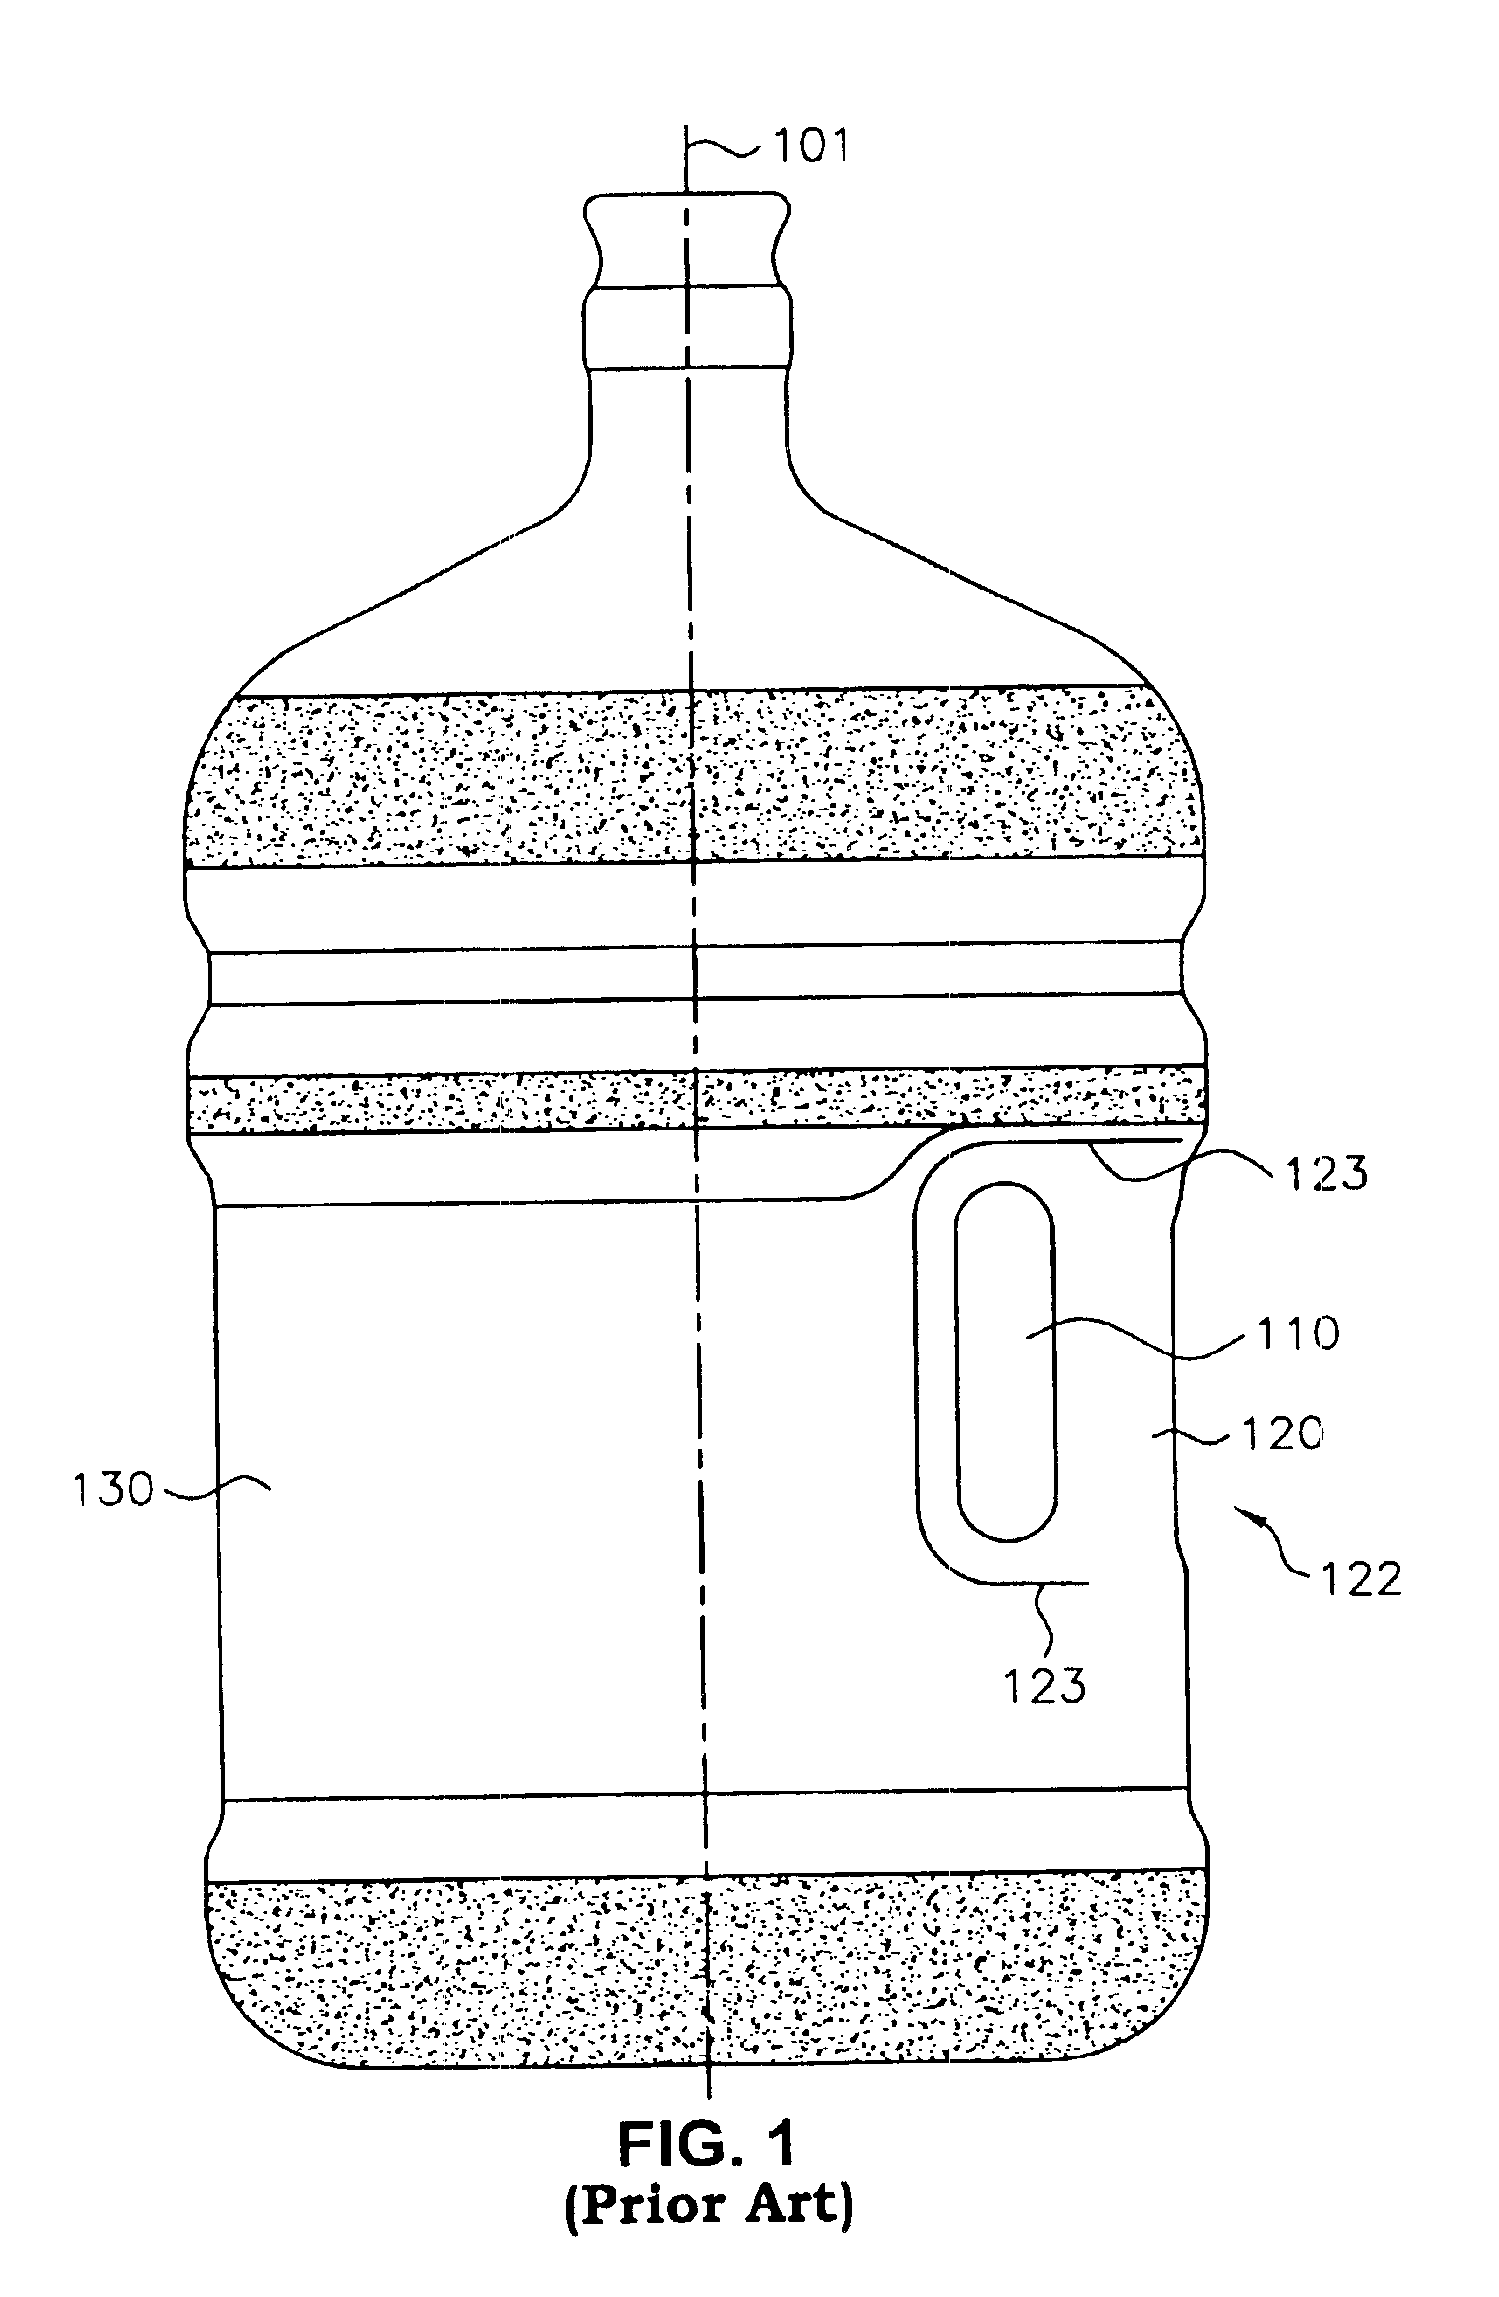 Water bottle with handle